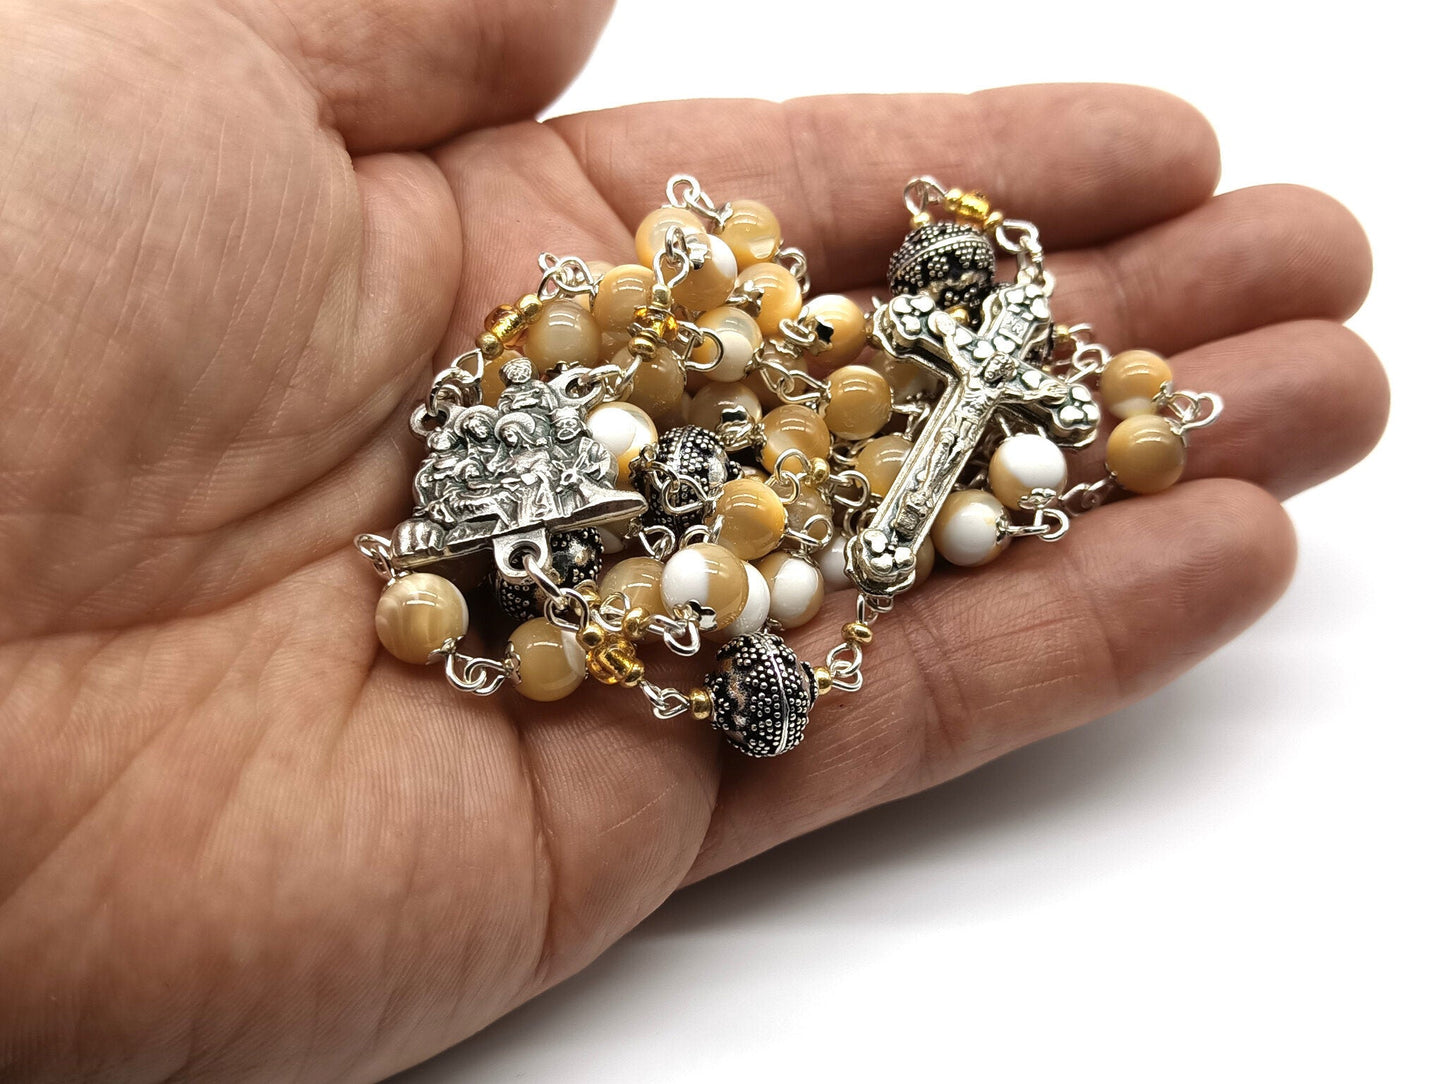 The Nativity unique rosary beads with mother of pearl and silver beads, silver crucifix and centre medal.